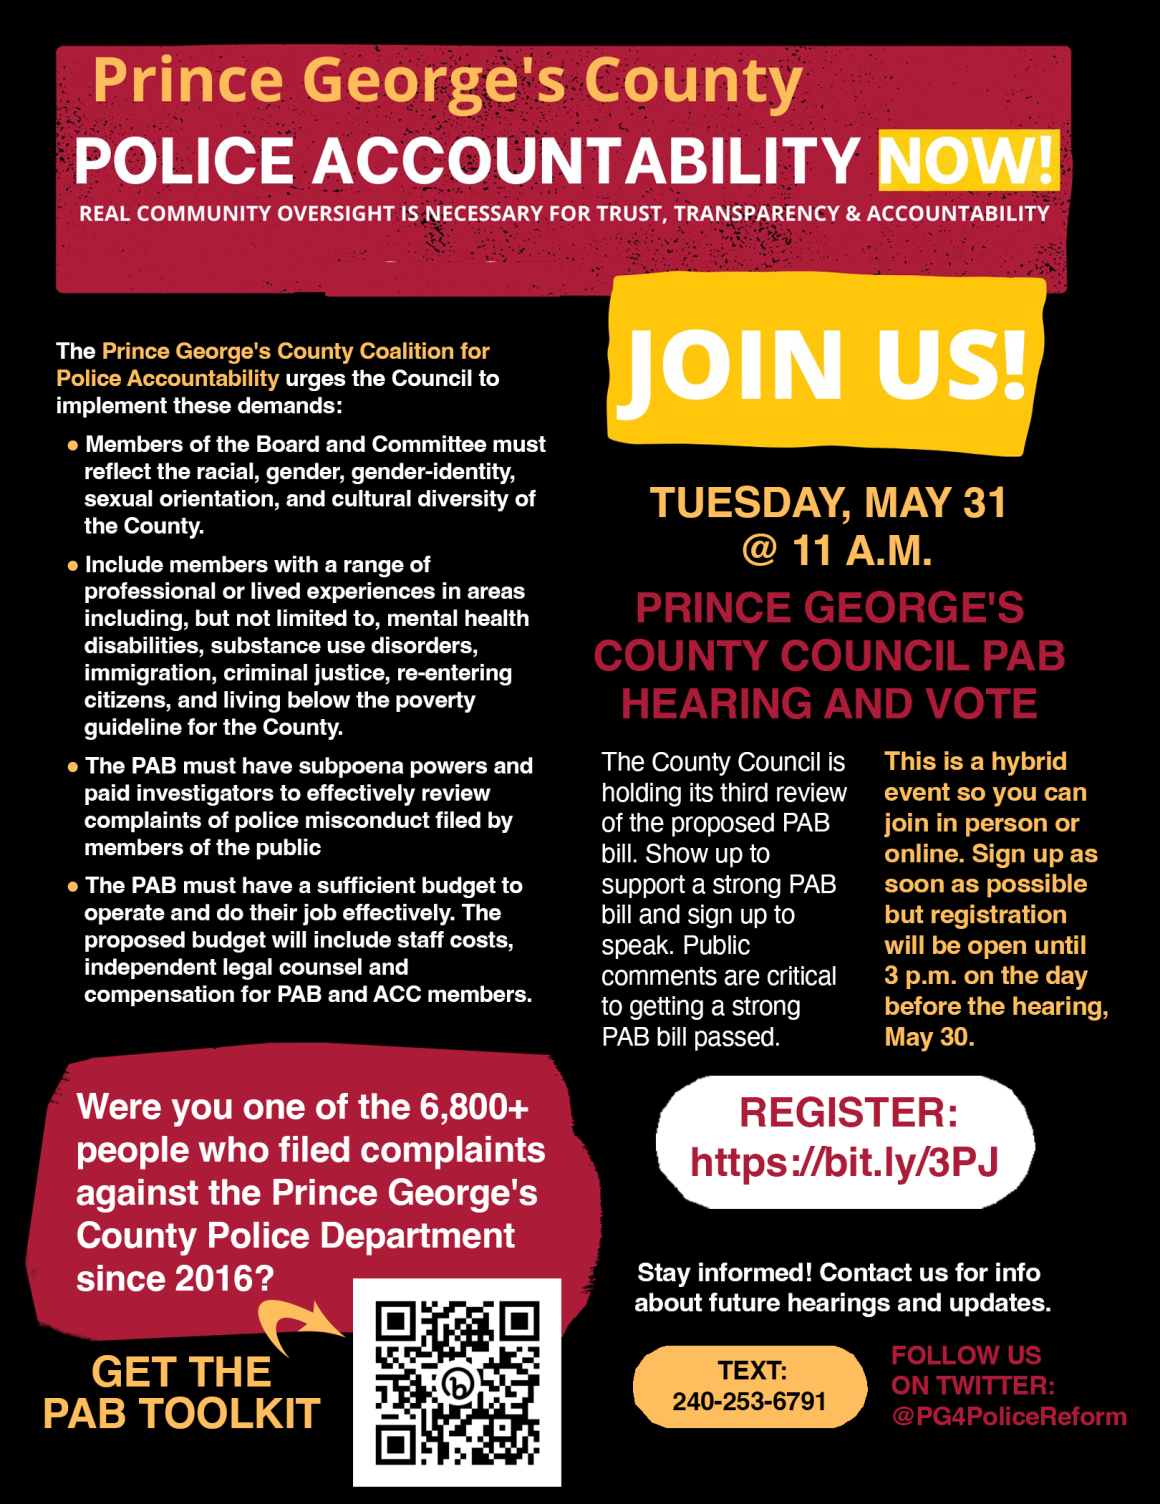 Prince George's County Police Accountability Bill Listening Session. May 25, 2022, at 6:30 p.m. Flyer has a list of the Prince George's County Coalition for Police Accountability's demands and info about the community forum on May 25.